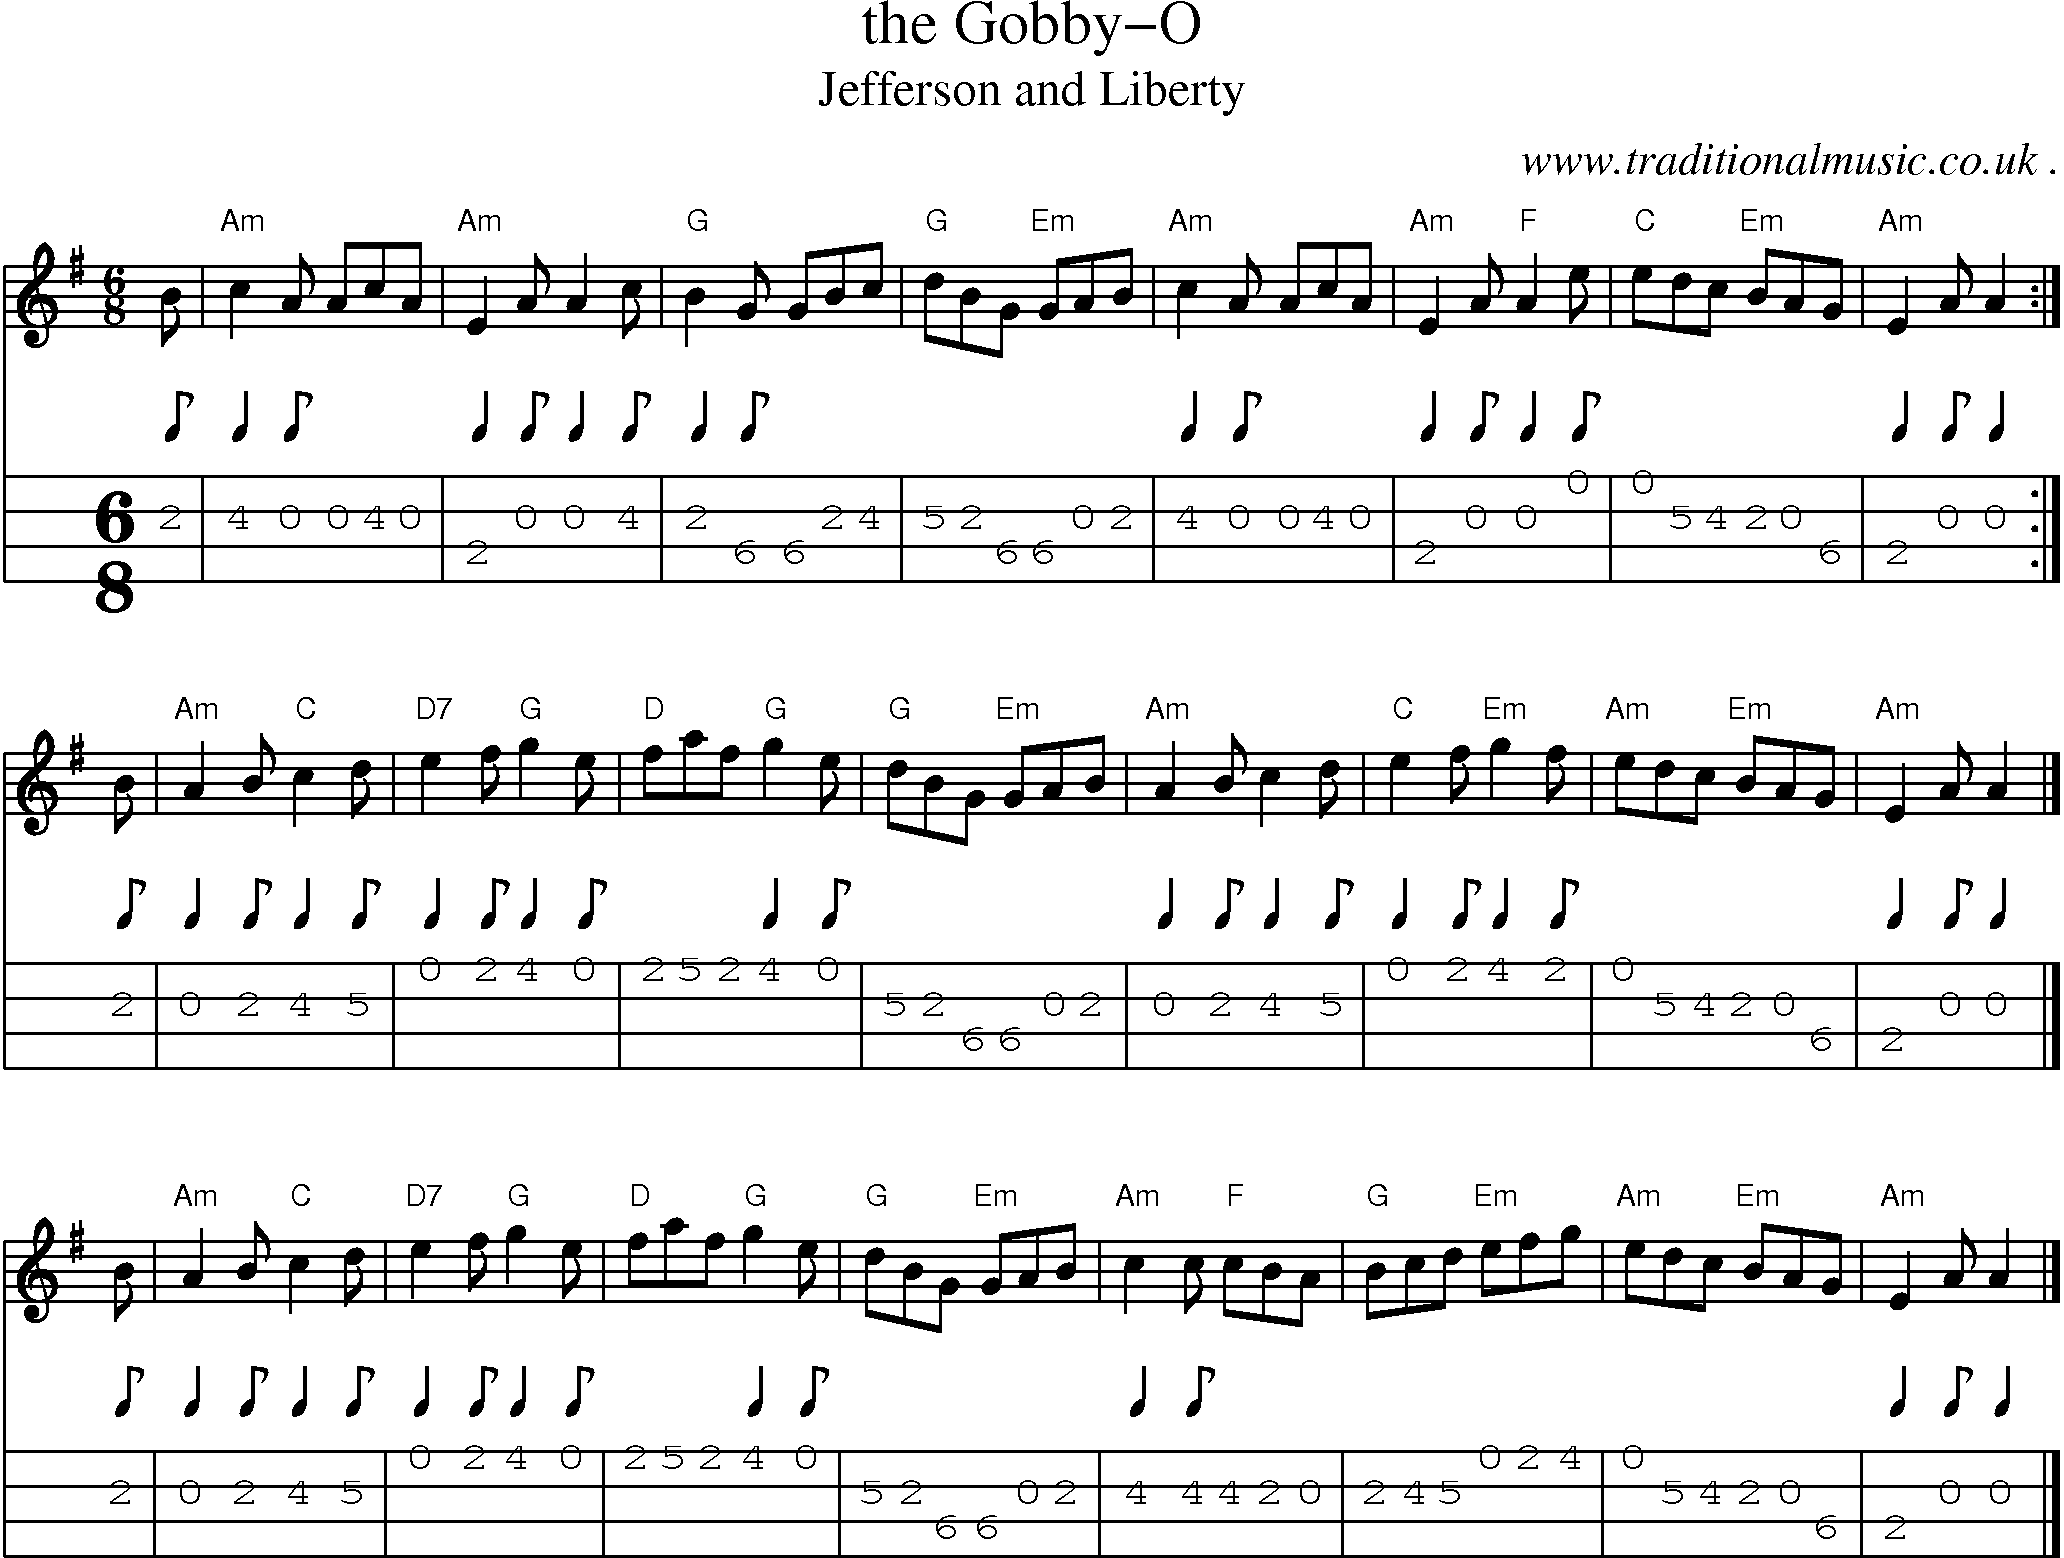 Sheet-music  score, Chords and Mandolin Tabs for The Gobby-o